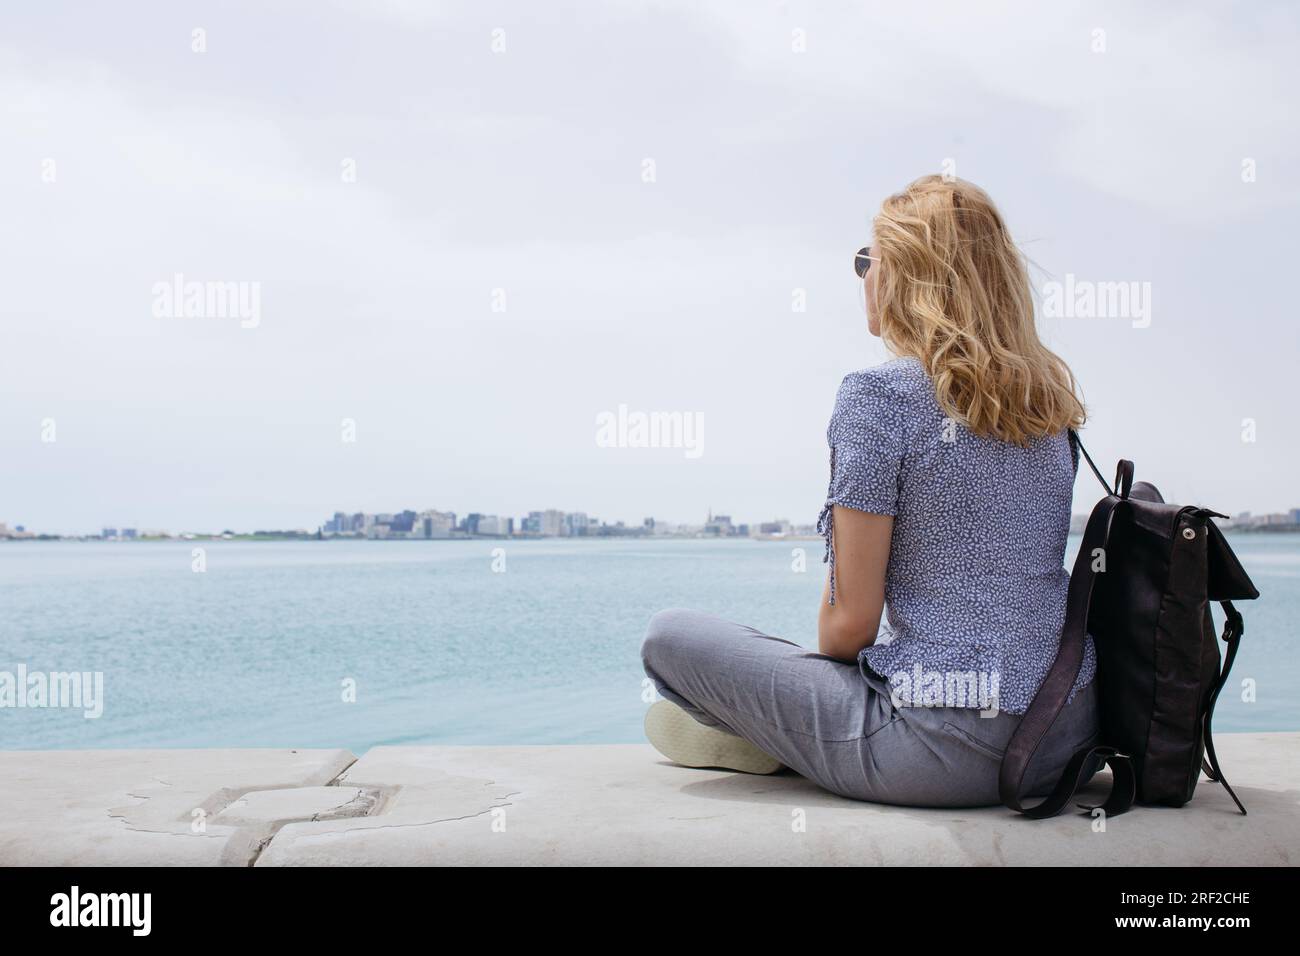 Backview of a blond woman sitting and watching the sea Stock Photo